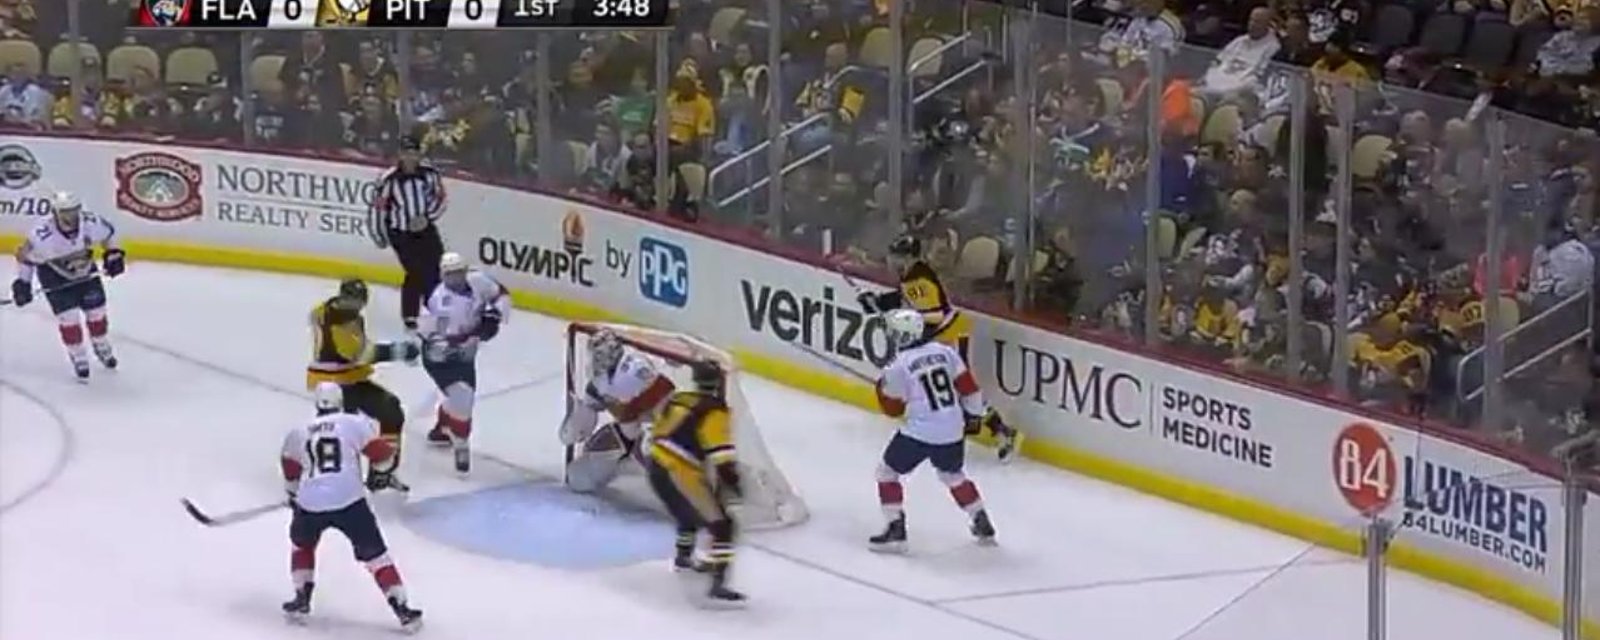 Amazing ingame trick shot by Kessel and Hornqvist. 